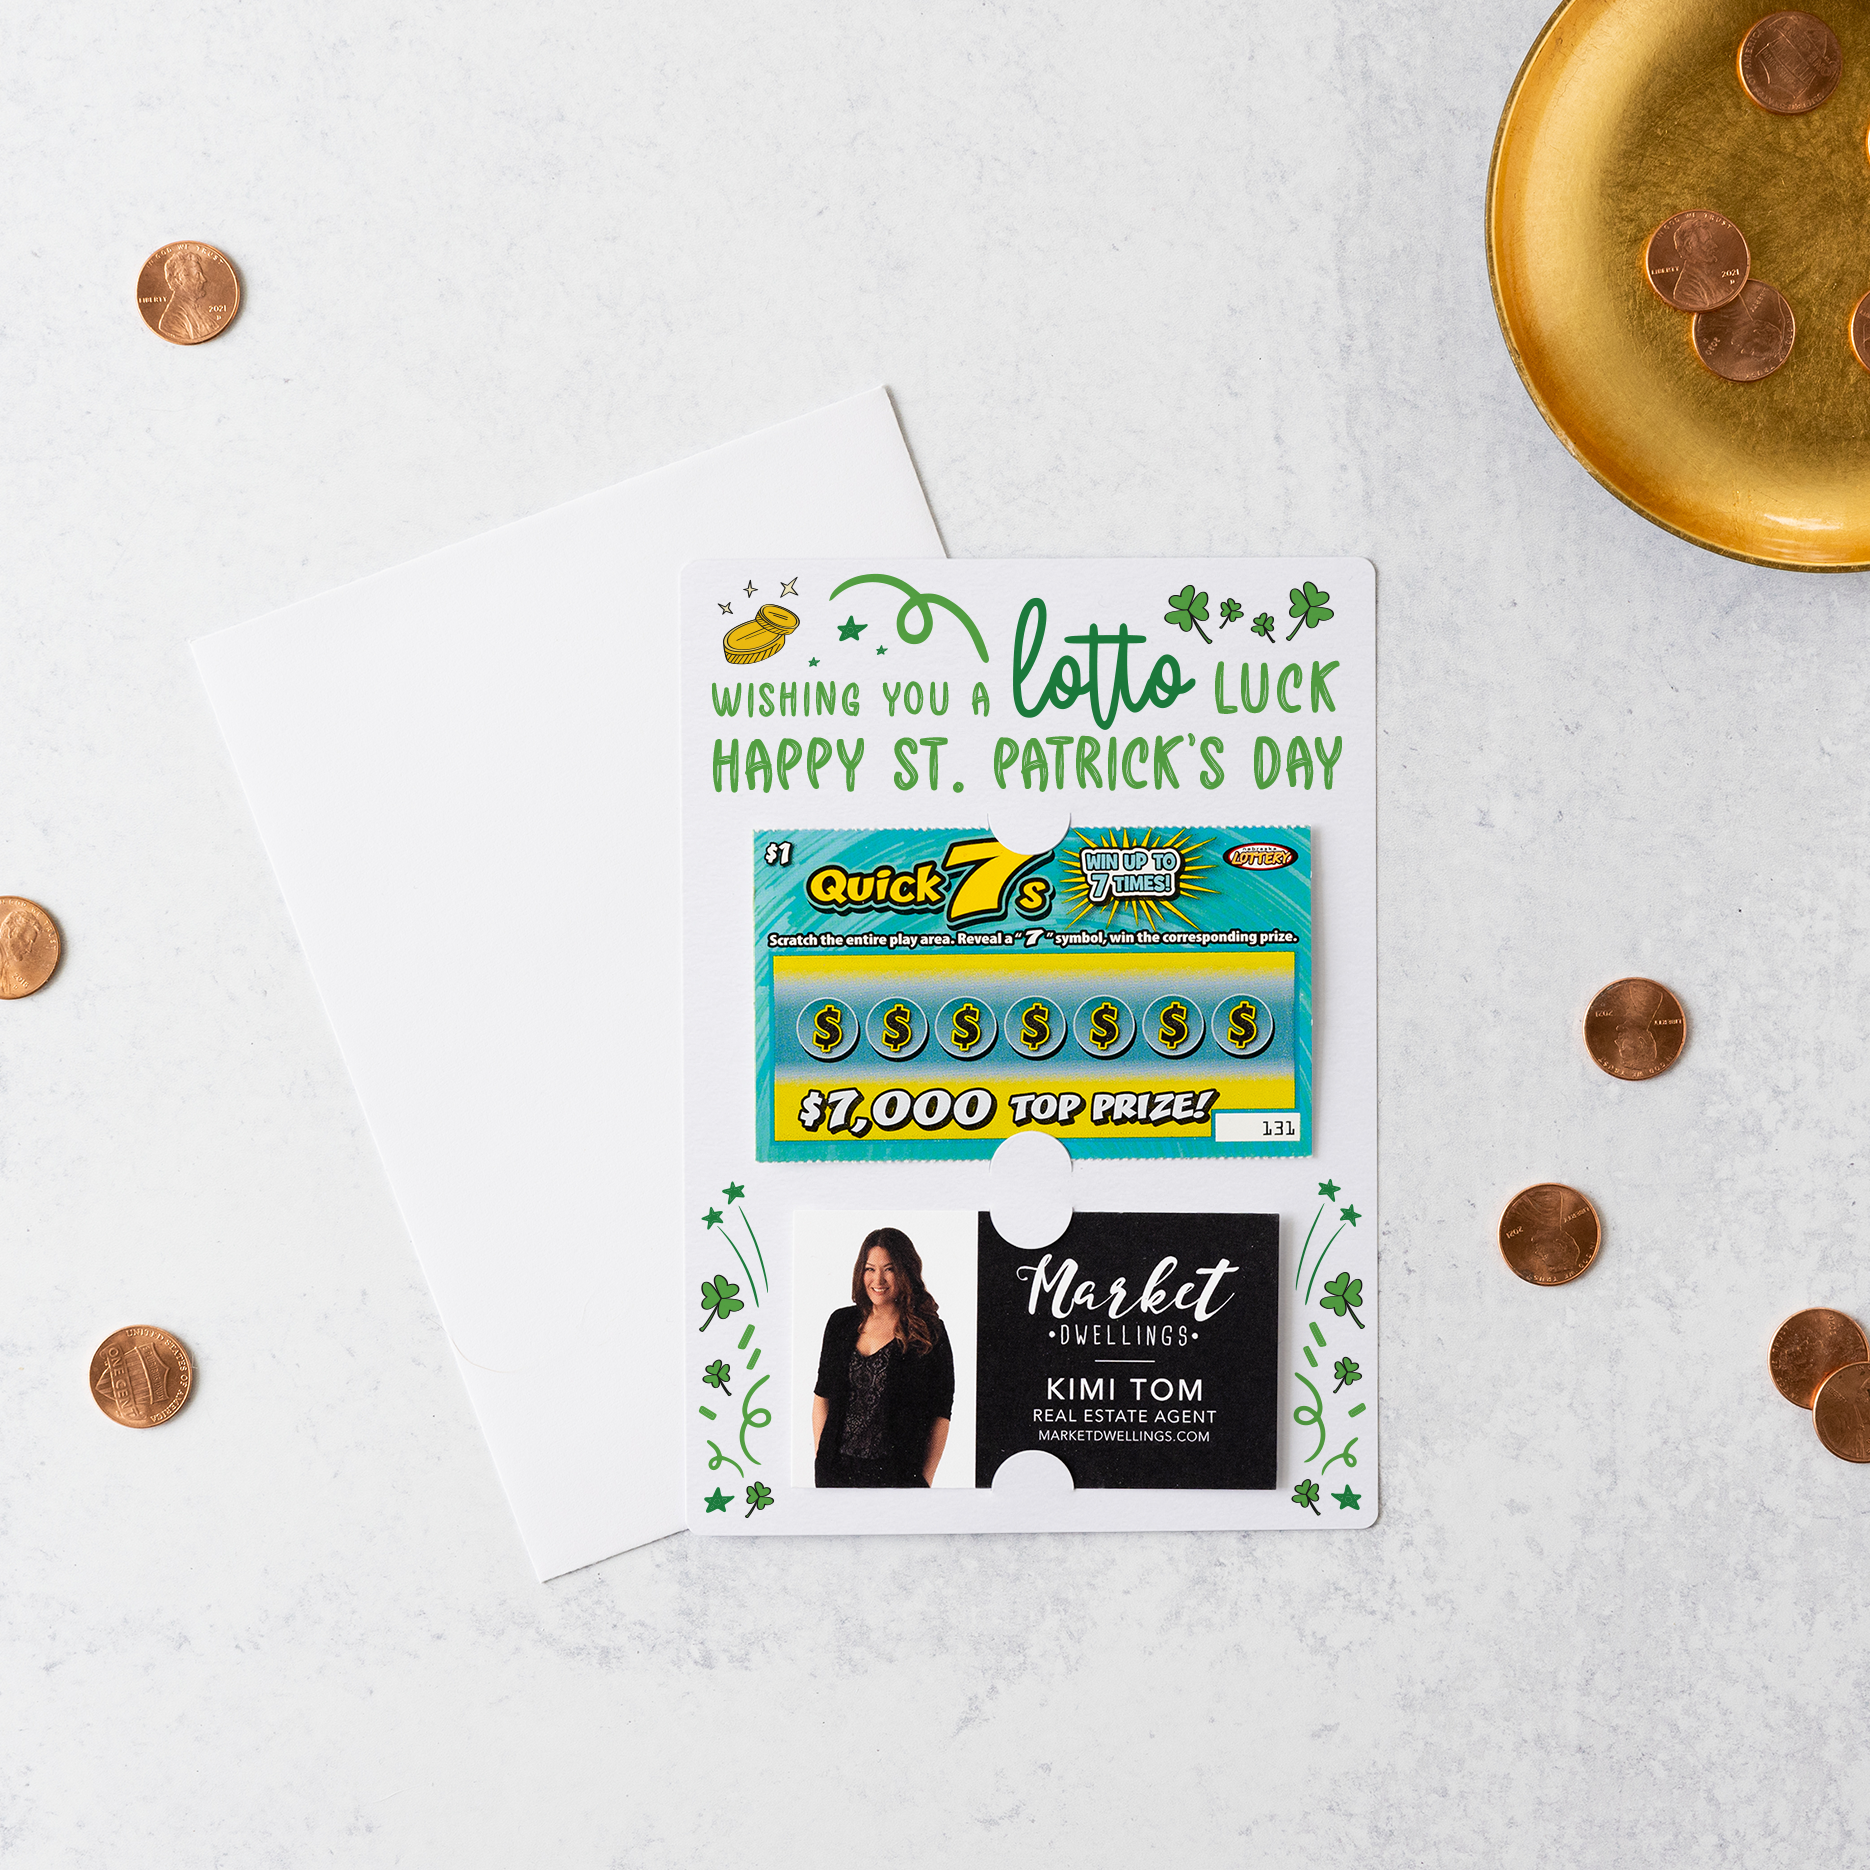 Wishing You A Lotto Luck Gift Card Holder - Party Peanut